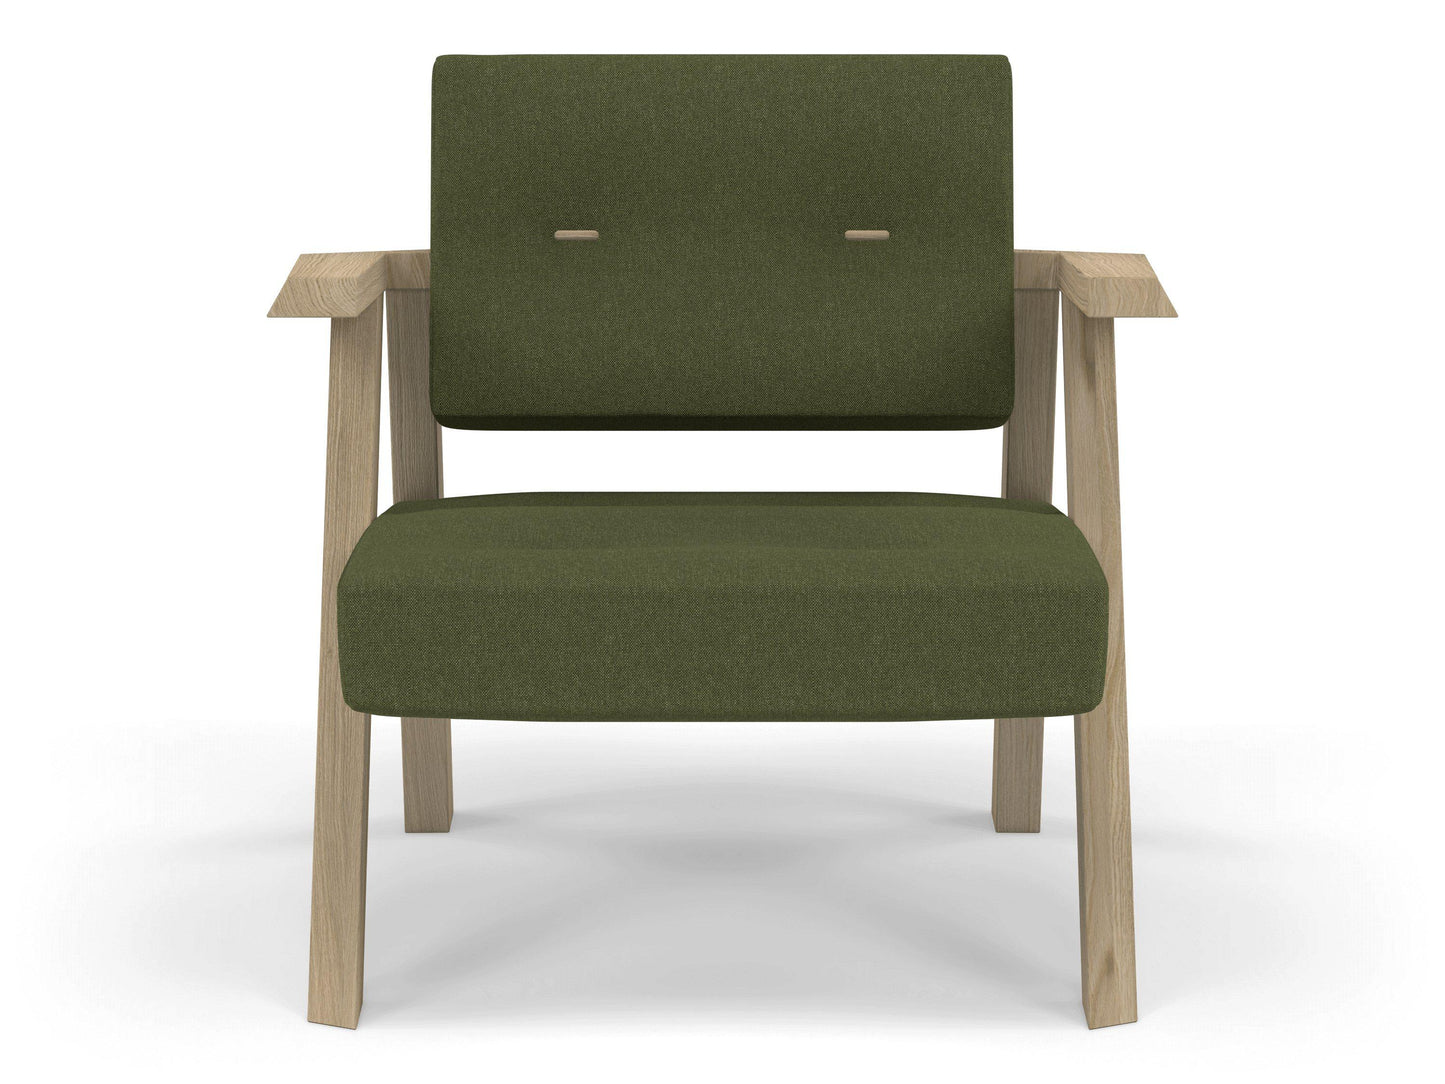 Classic Mid-century Design Armchair with Buttons in Seaweed Green Fabric-Natural Oak-Distinct Designs (London) Ltd